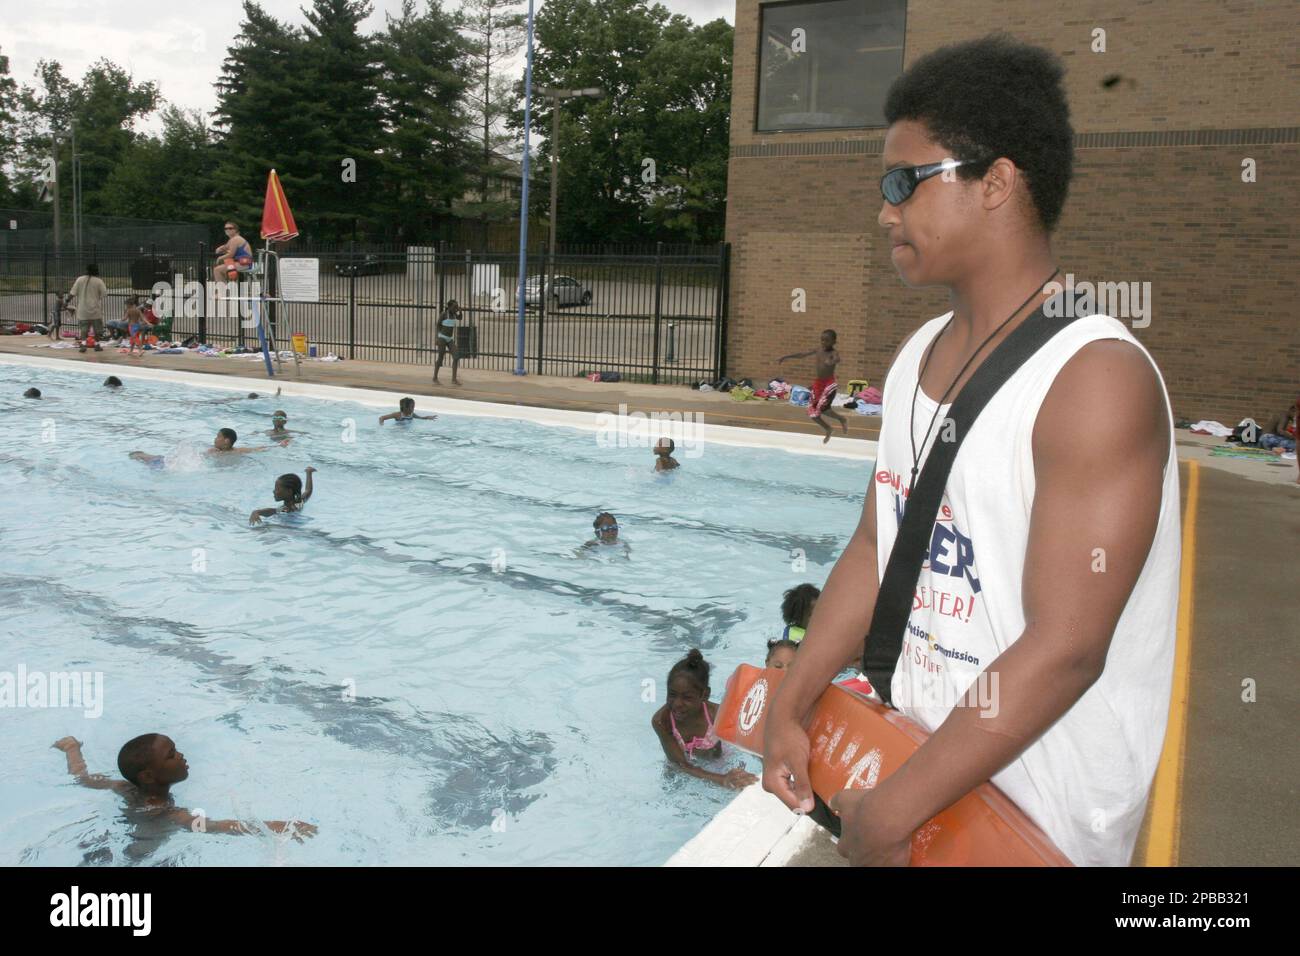 https://c8.alamy.com/comp/2PBB321/advance-for-sunday-july-15-lifeguard-illyas-hodrick-watches-over-swimmers-at-pleasant-ridge-pool-tuesday-june-19-2007-in-cincinnati-the-need-for-lifeguards-has-grown-consistently-over-the-last-25-years-fueled-by-the-proliferation-of-water-parks-along-with-municipal-pools-and-private-aquatic-facilities-ap-photodavid-kohl-2PBB321.jpg